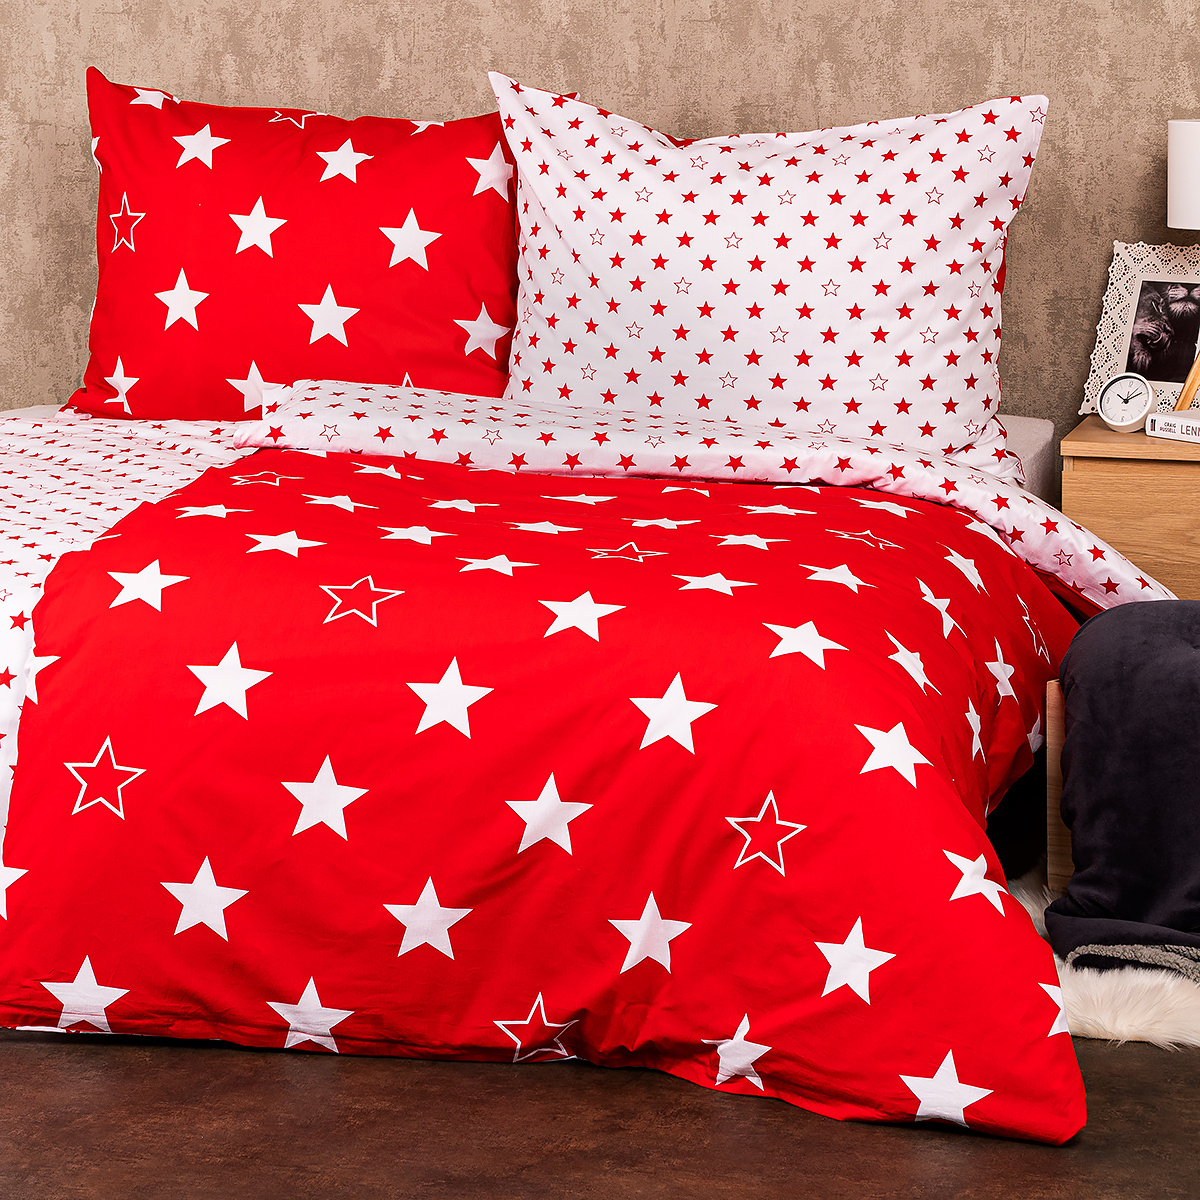 Lenjerie bumbac 4Home Stars red, 140 x 200 cm, 70 x 90 cm 140